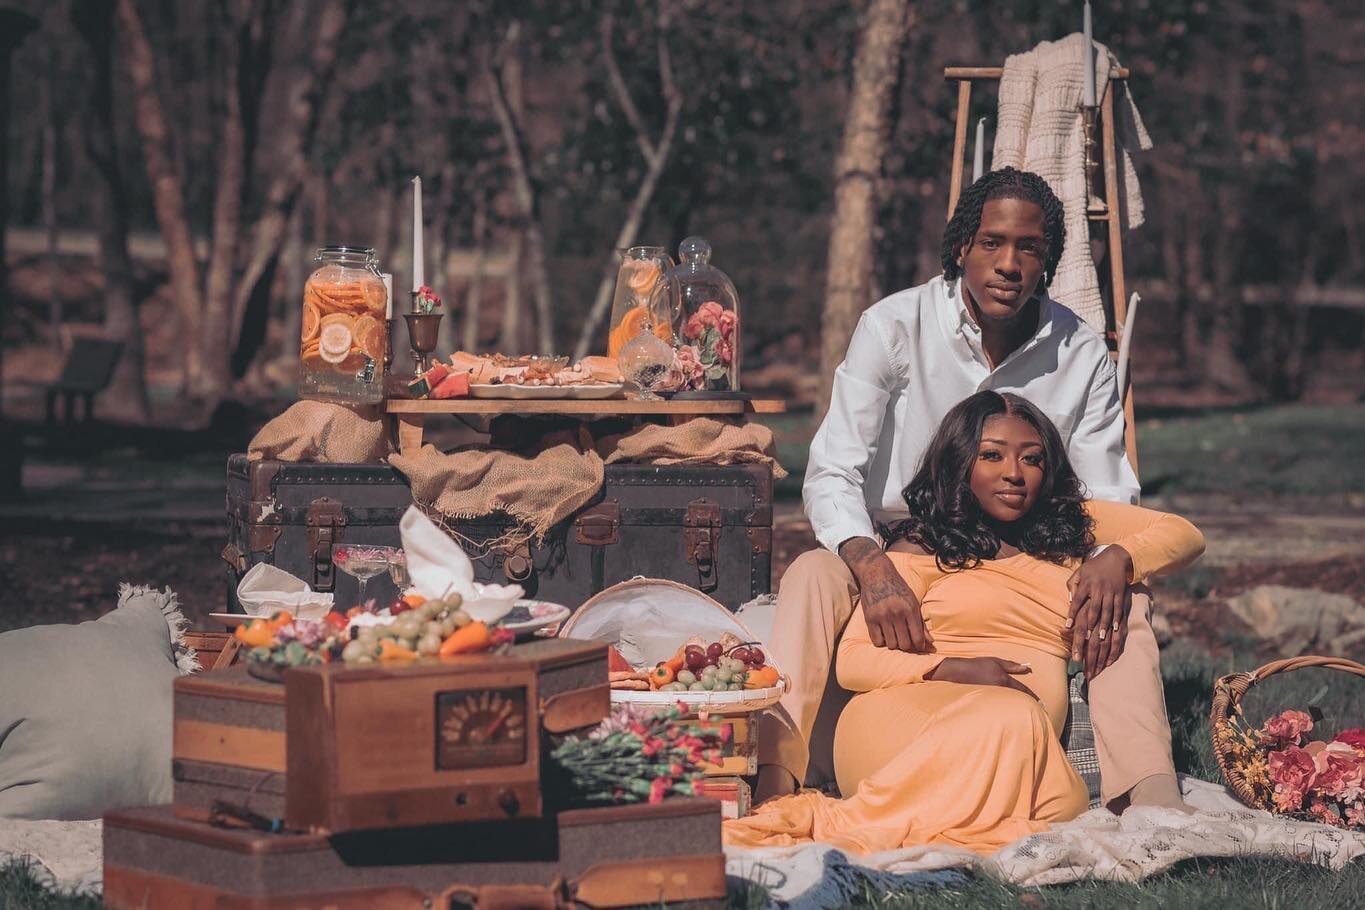 Over the years we have seen pregnancy photoshoots become more creative and we were happy to be a part of creating this one.

Tag a new mother below!! 🥰
&bull;
&bull;
#pregnacyshoot #pregancyphotoshoot #picnic #vintagepicnic #vintagedecprations #sonk